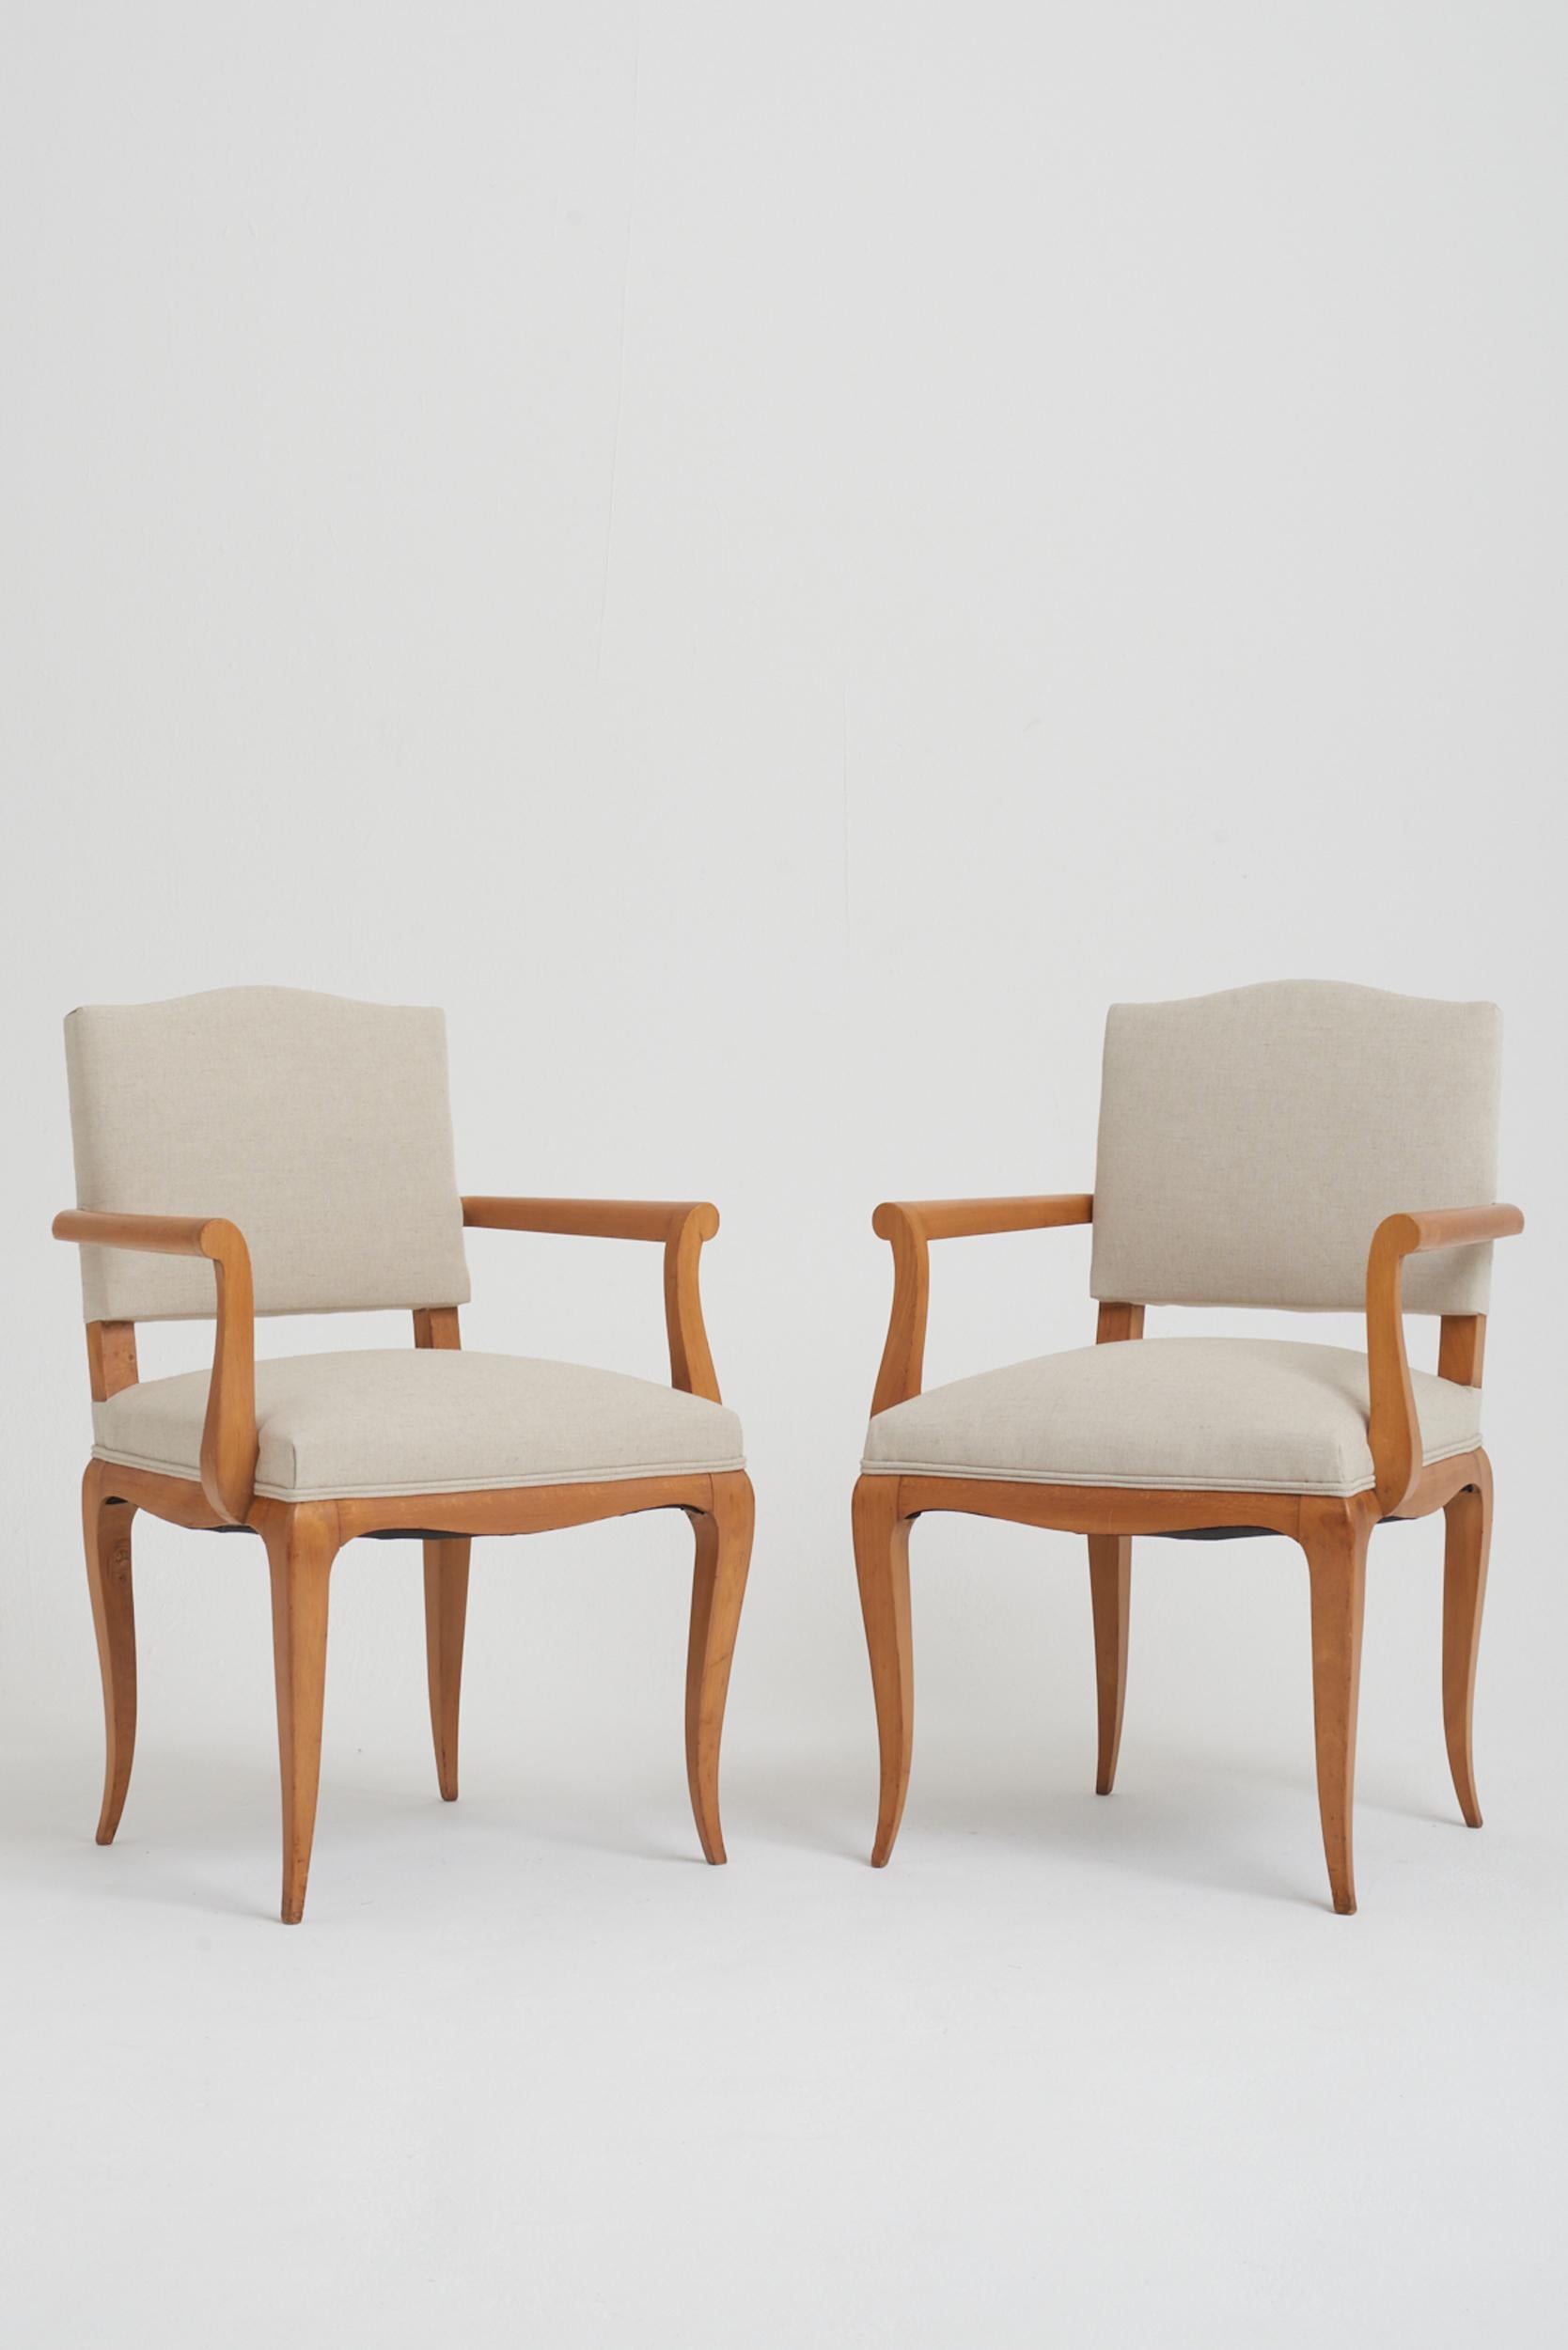 A pair of Art Deco sycamore armchairs, attributed to René Prou (1889-1948)
France, Circa 1935.